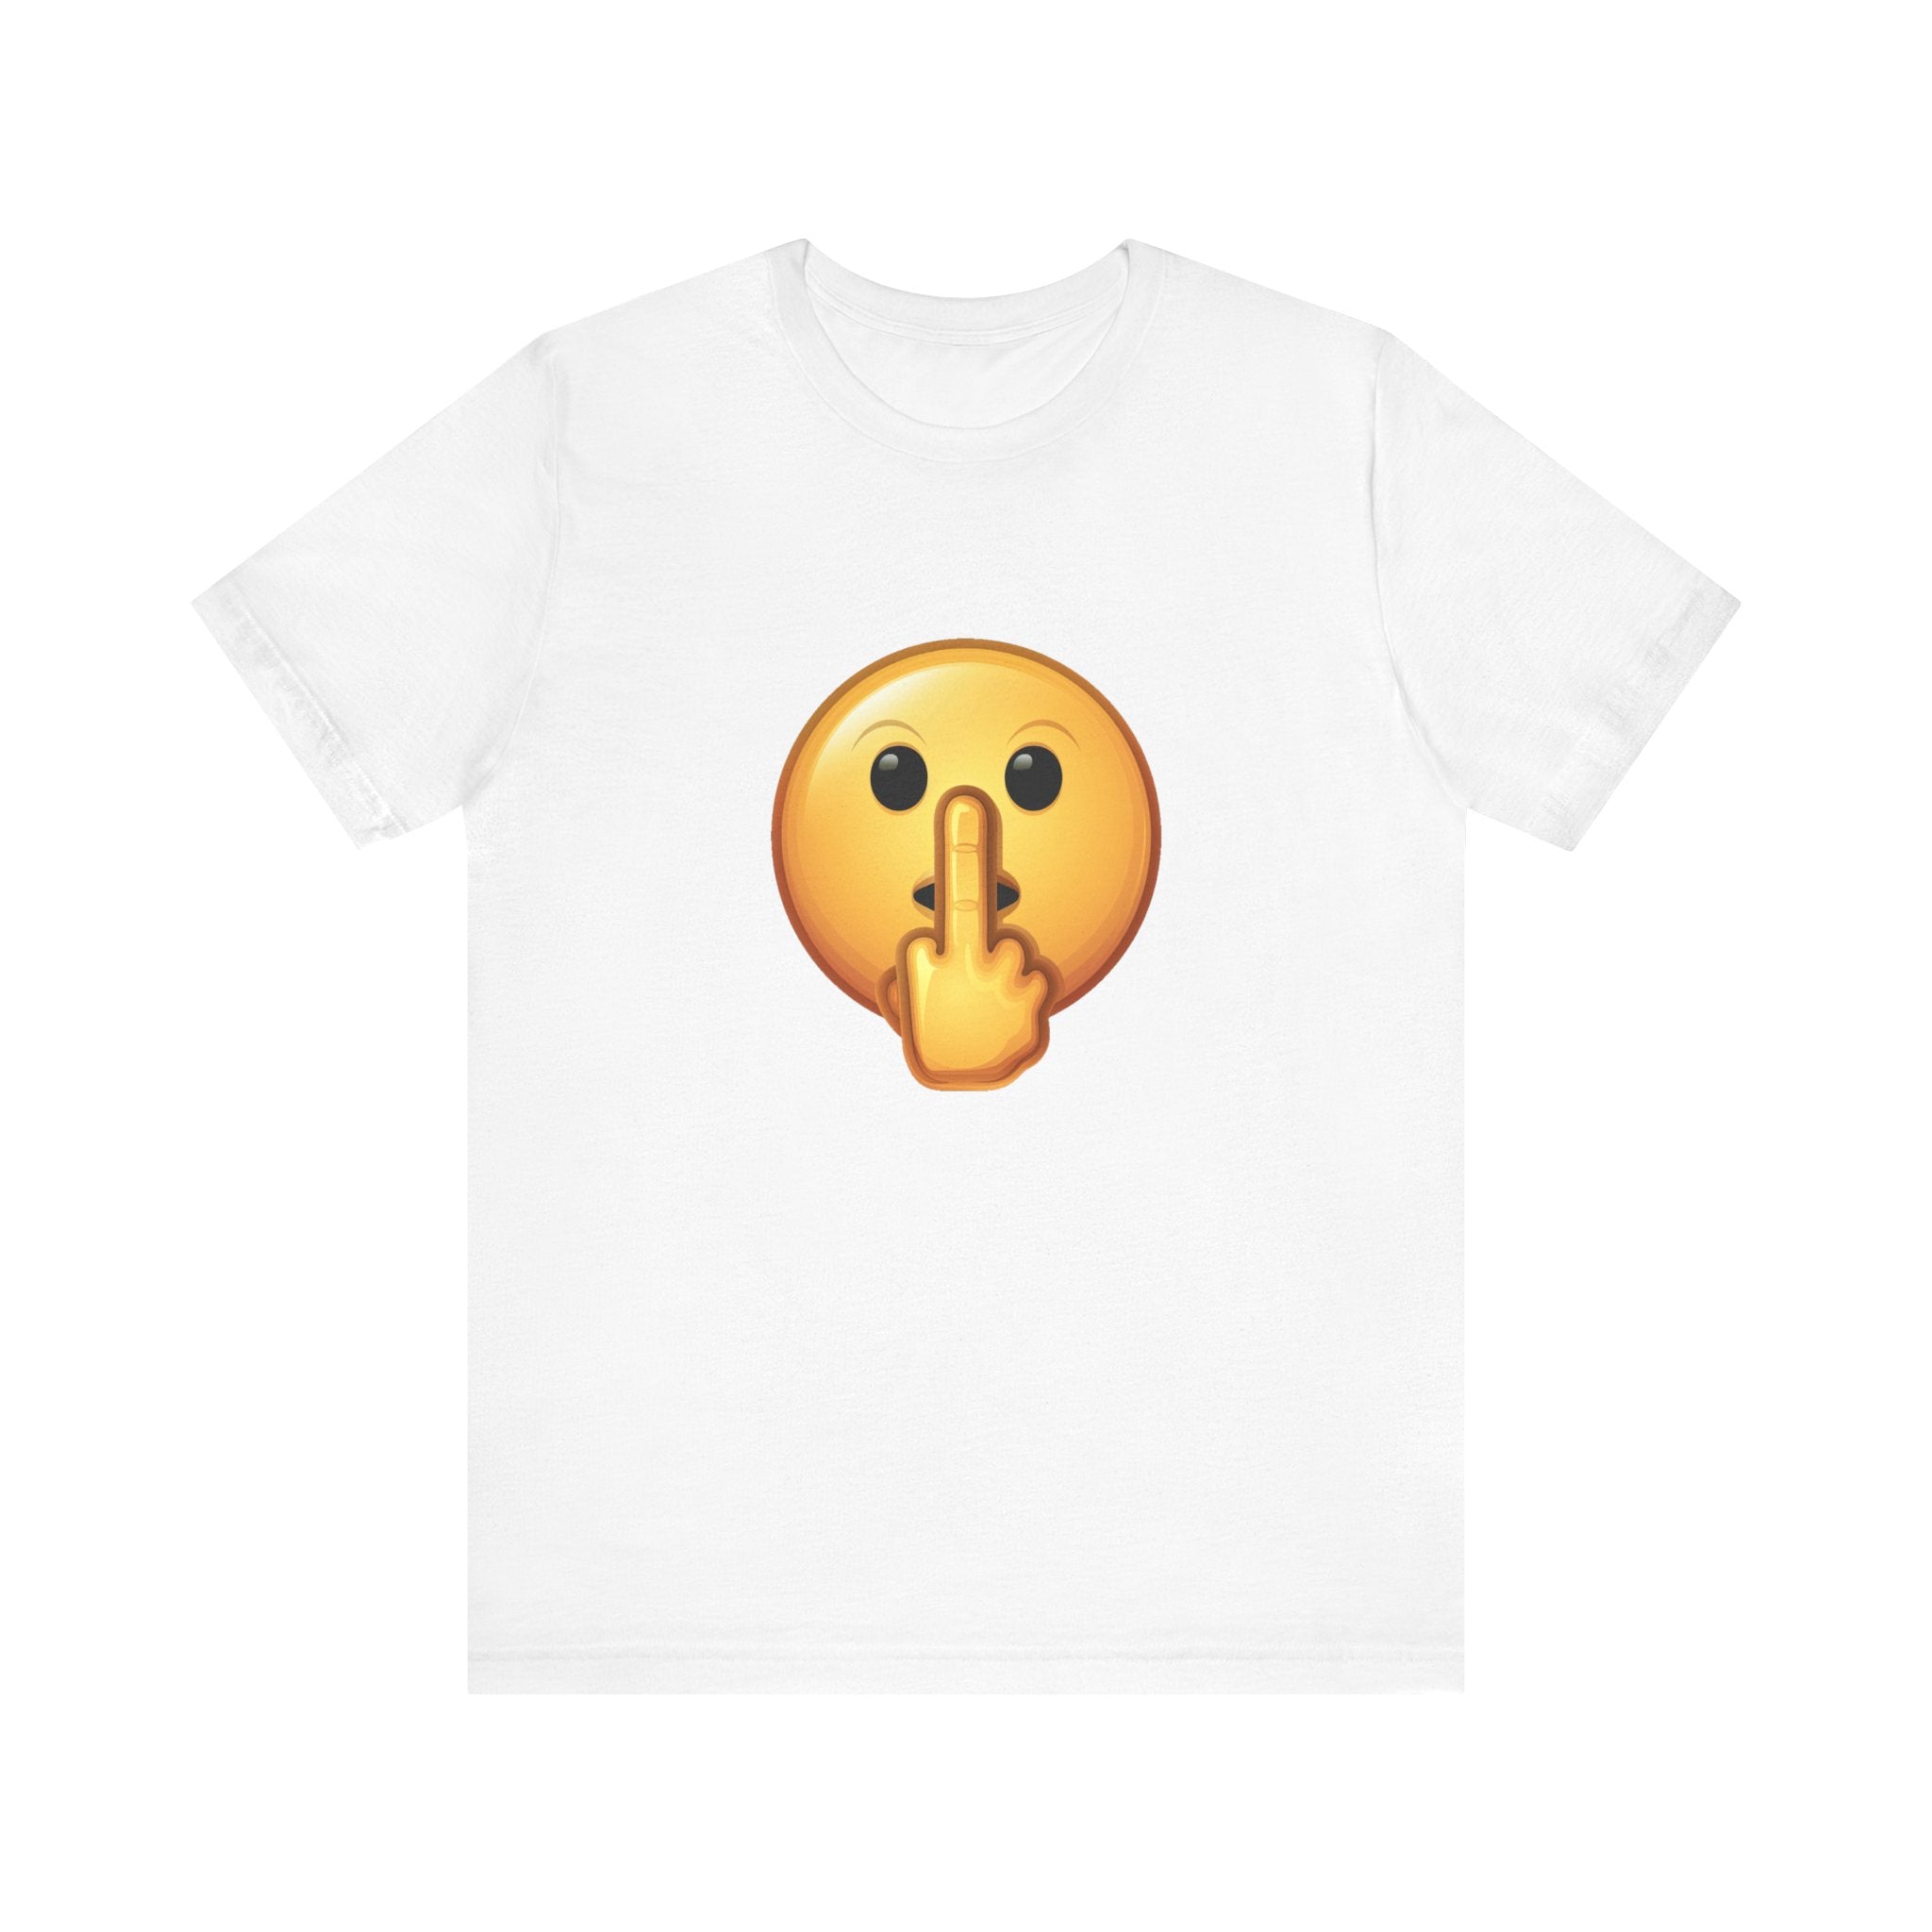 Middle Finger FU Shh Silent Protest Emoji Tee (Small Graphic)